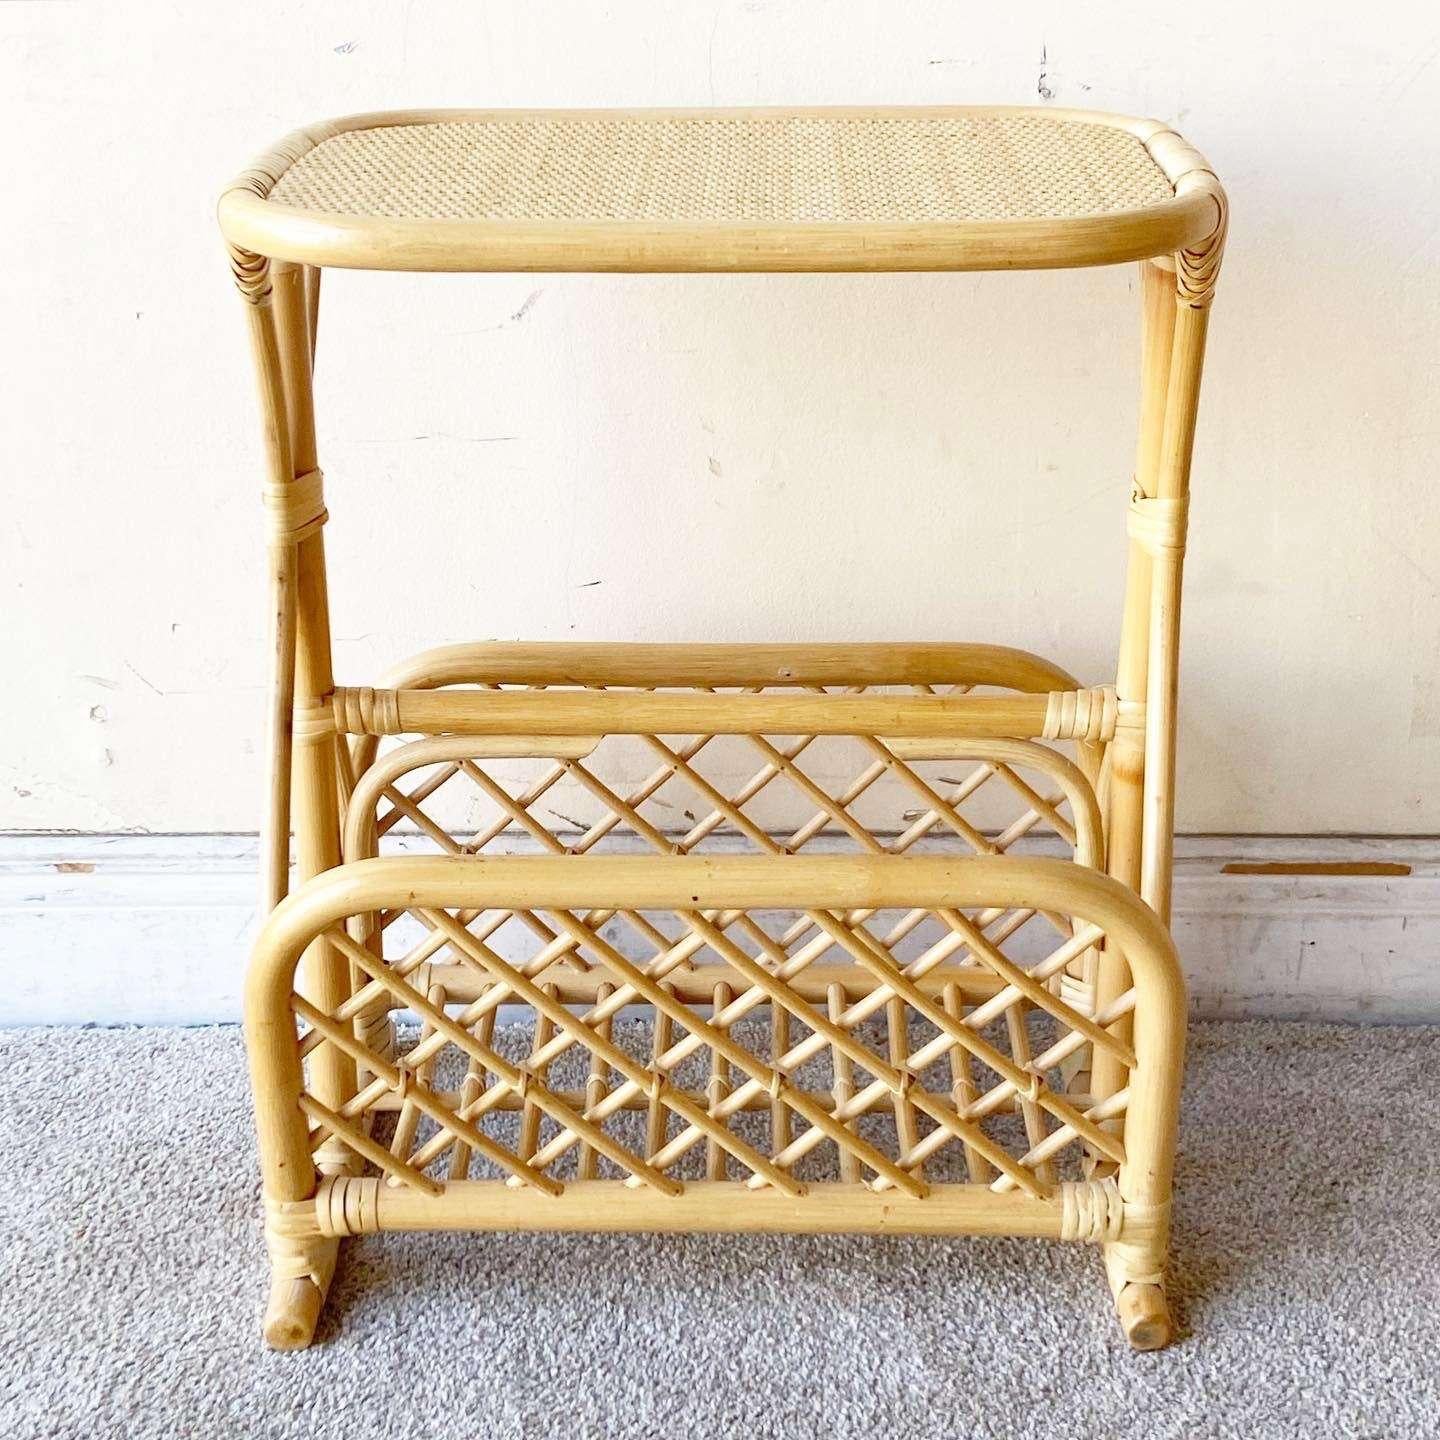 Boho Chic Bamboo Rattan Magazine Rack Side Table In Good Condition For Sale In Delray Beach, FL